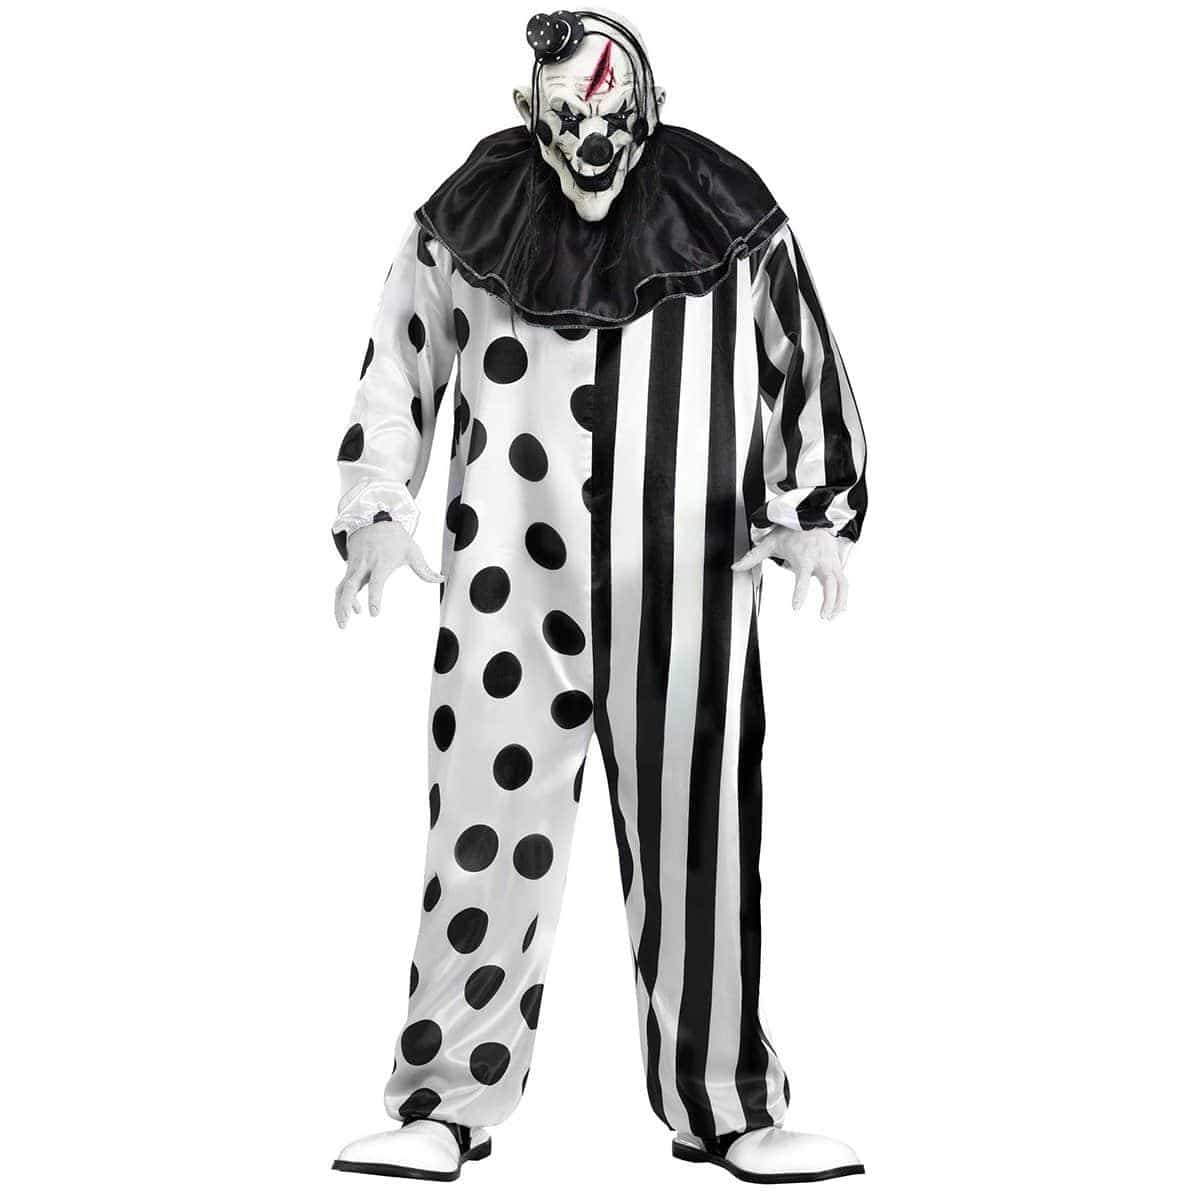 Buy Costumes Killer Clown Costume for Plus Size Adults sold at Party Expert